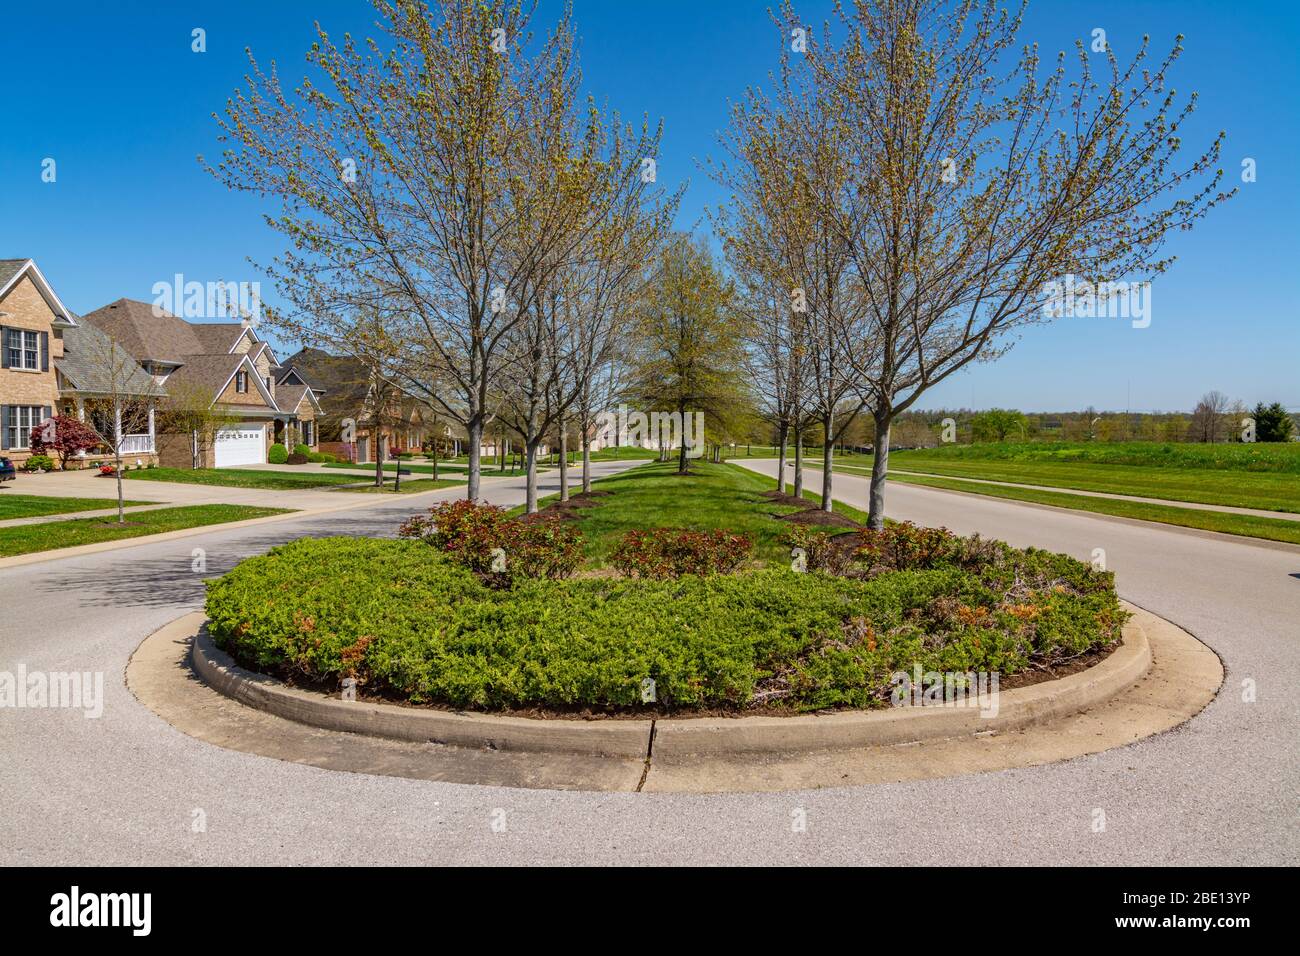 Culdesac in a suburban residential area Stock Photo